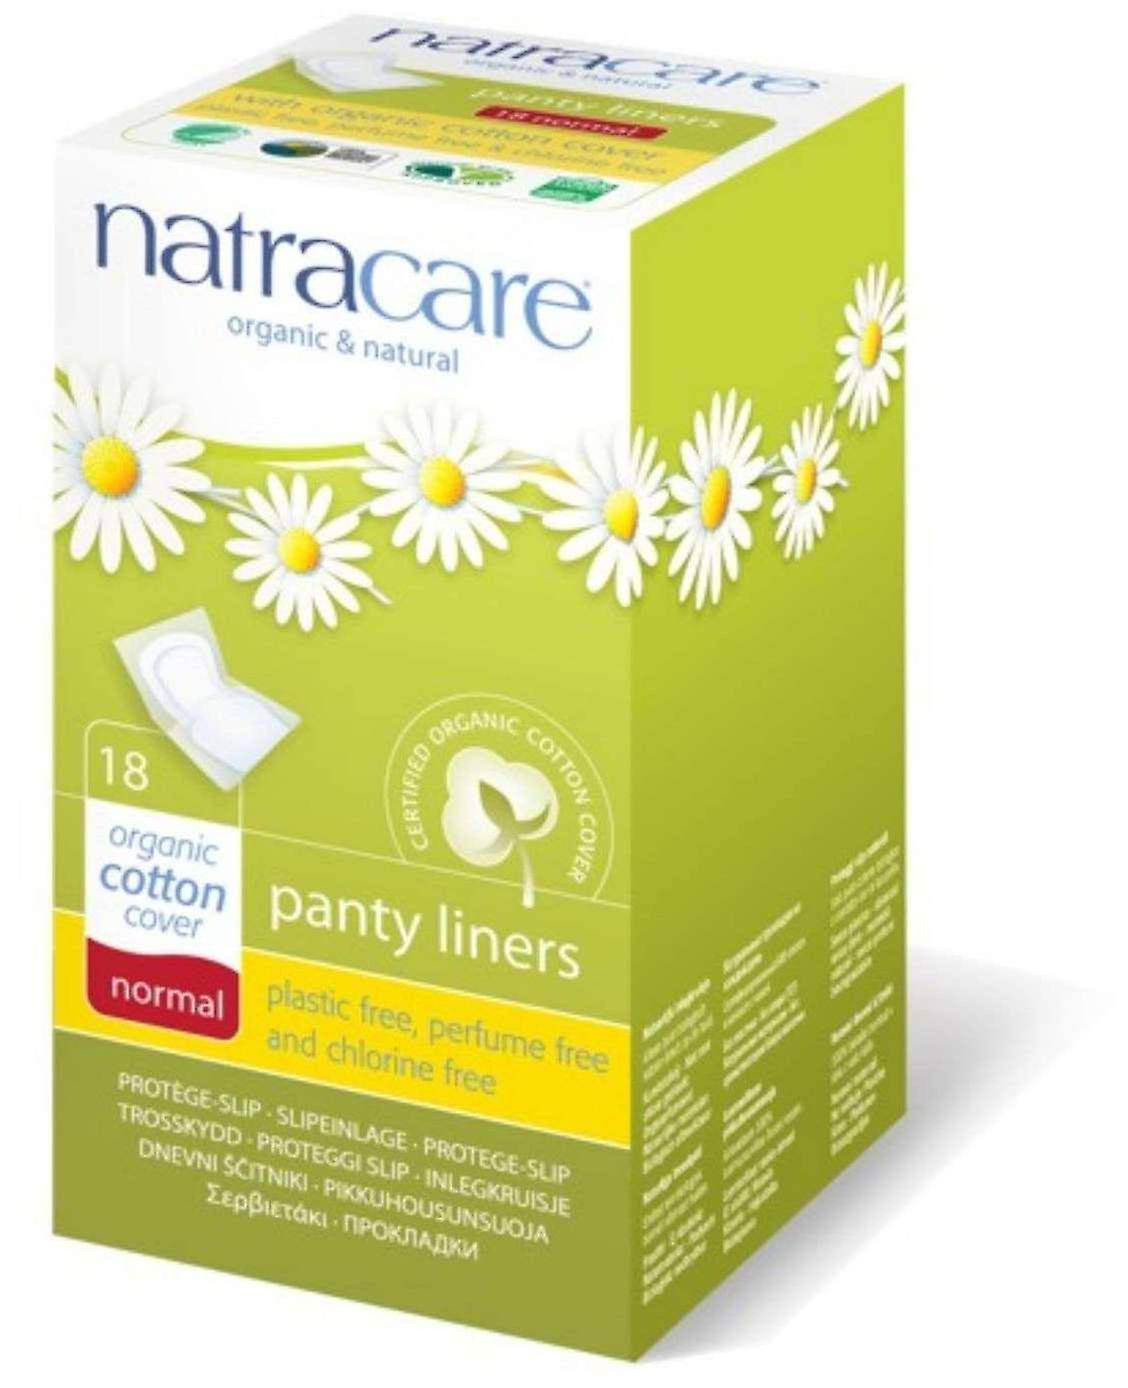 Natracare Organic Cotton Cover Panty Liners - Normal, 18ct